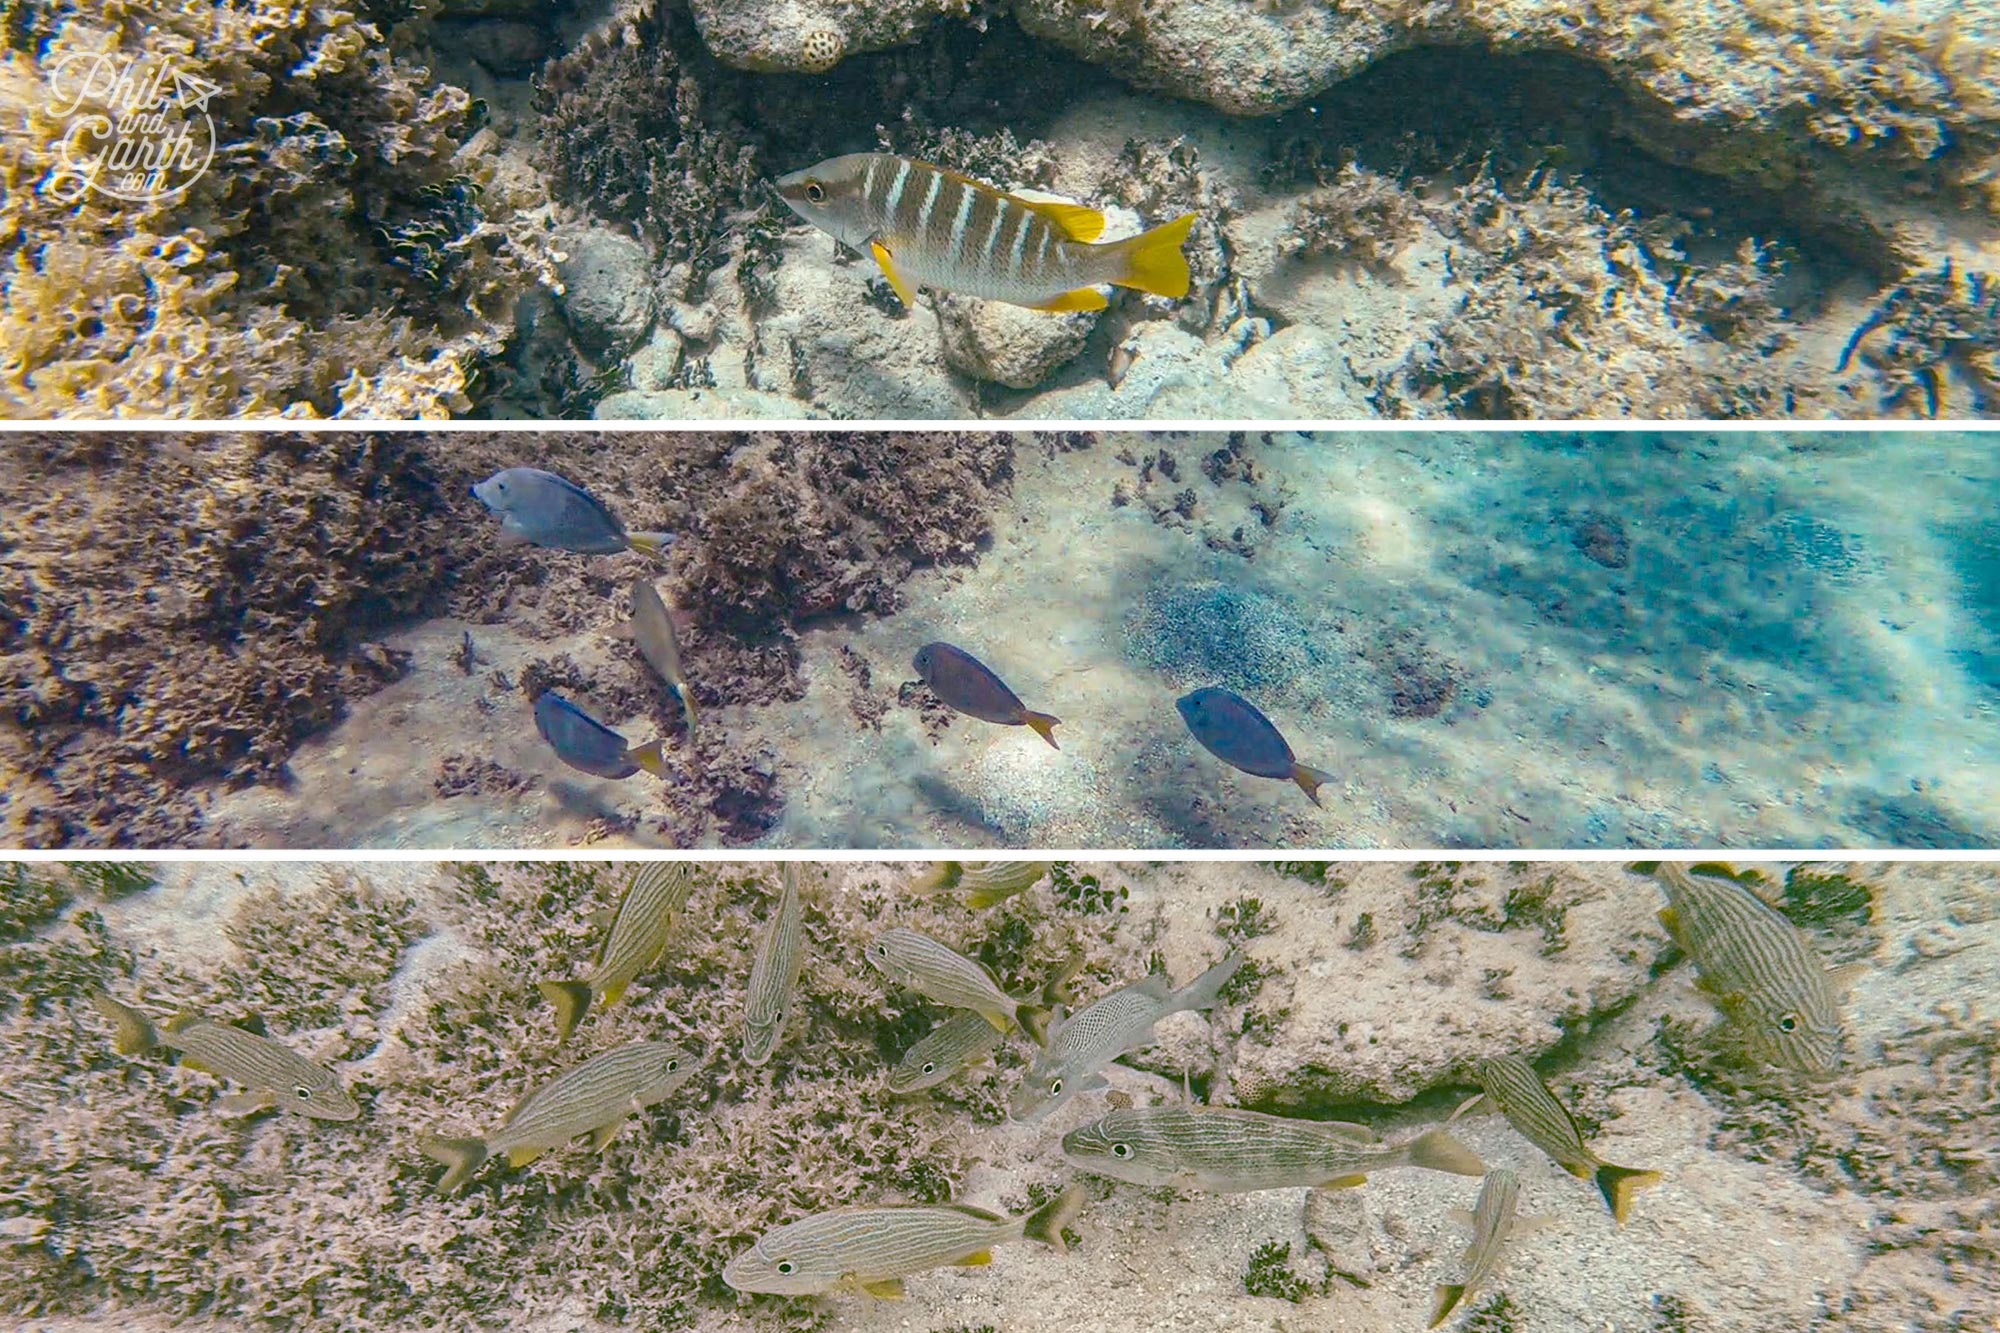 Just some of the fish we saw snorkelling at Pinel Island